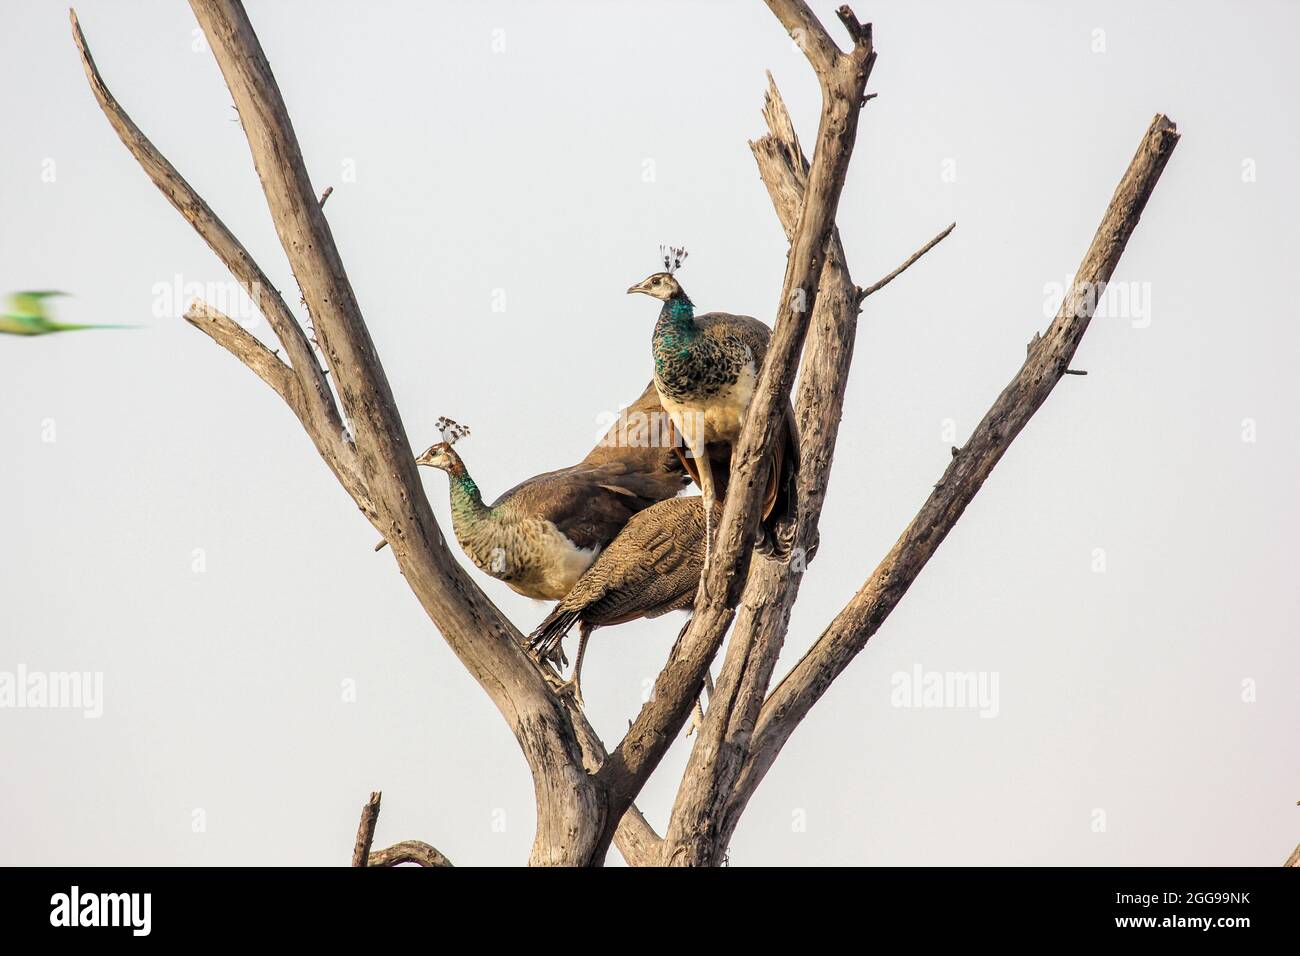 Closeup shot of Indian peafowls (Pavo cristatus) on a tree branch Keoladeo National Park, India Stock Photo